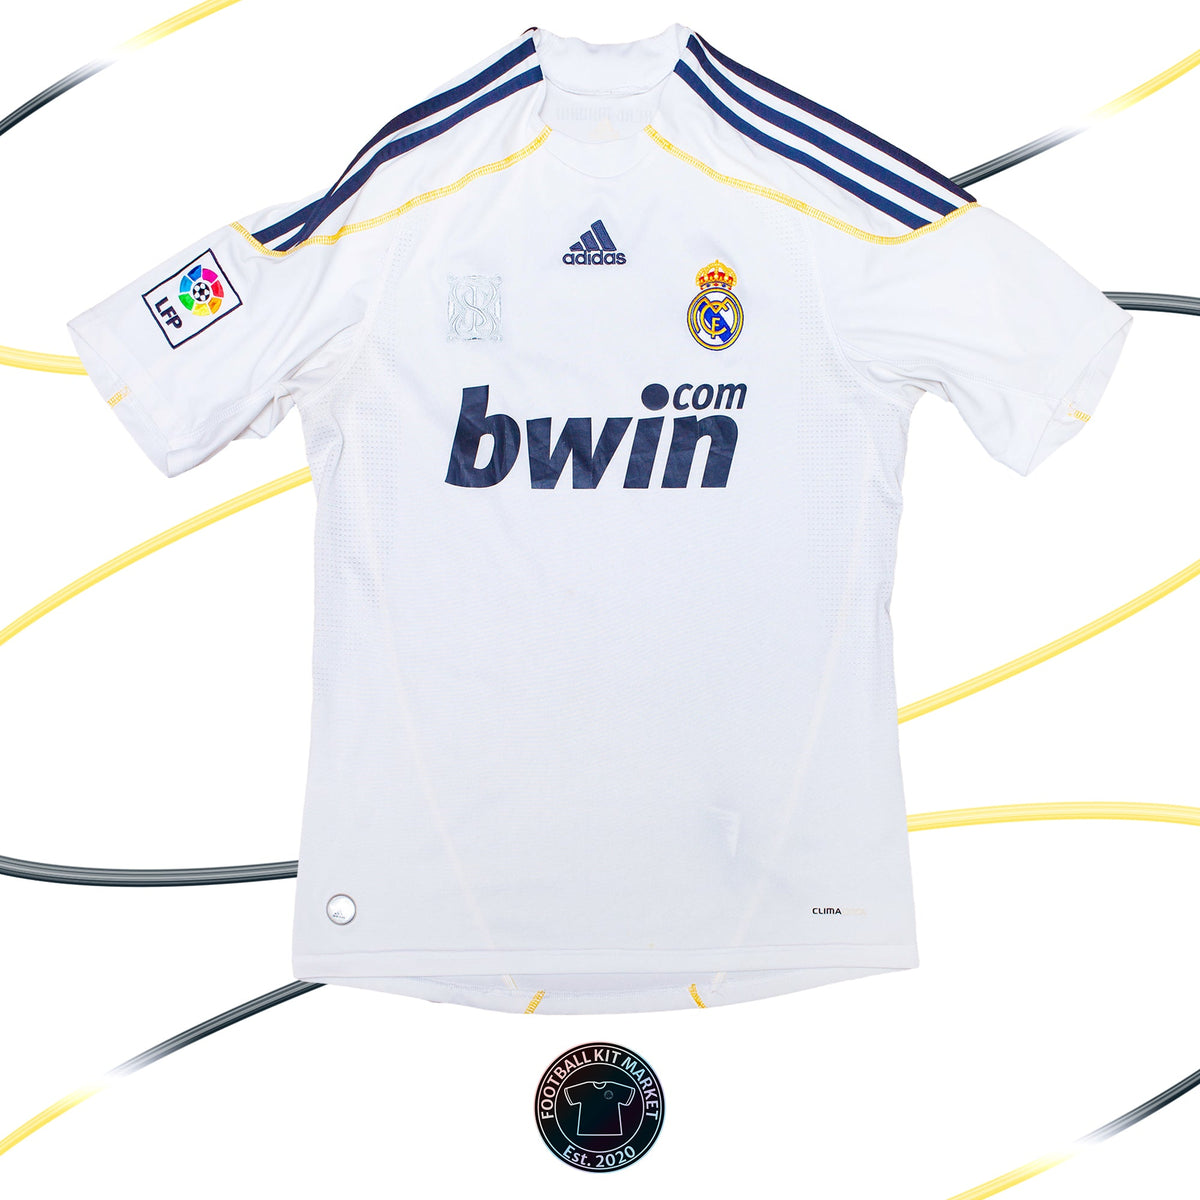 Genuine REAL MADRID Home (2009-2010) - ADIDAS (M) - Product Image from Football Kit Market